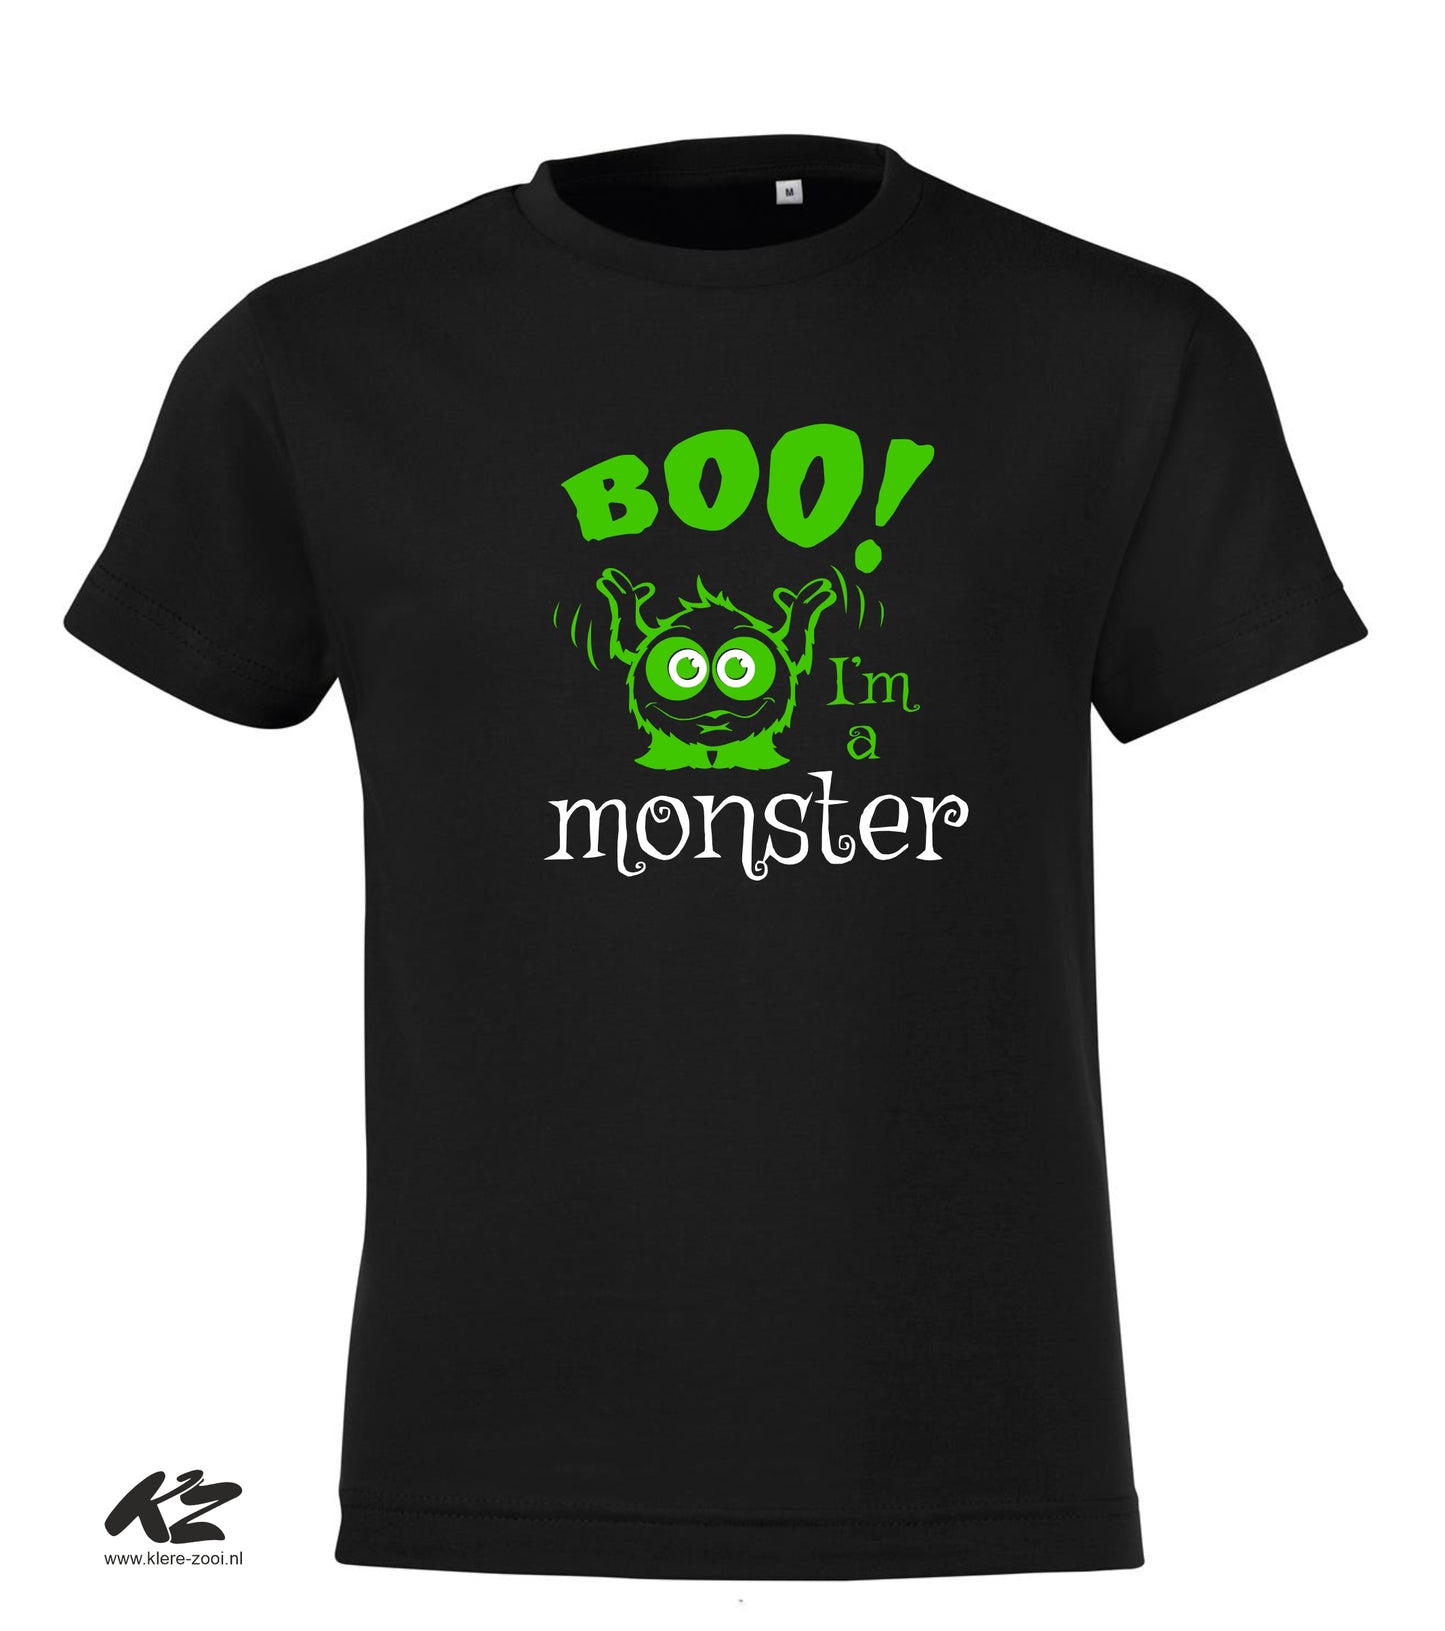 Boo! I'm a Monster